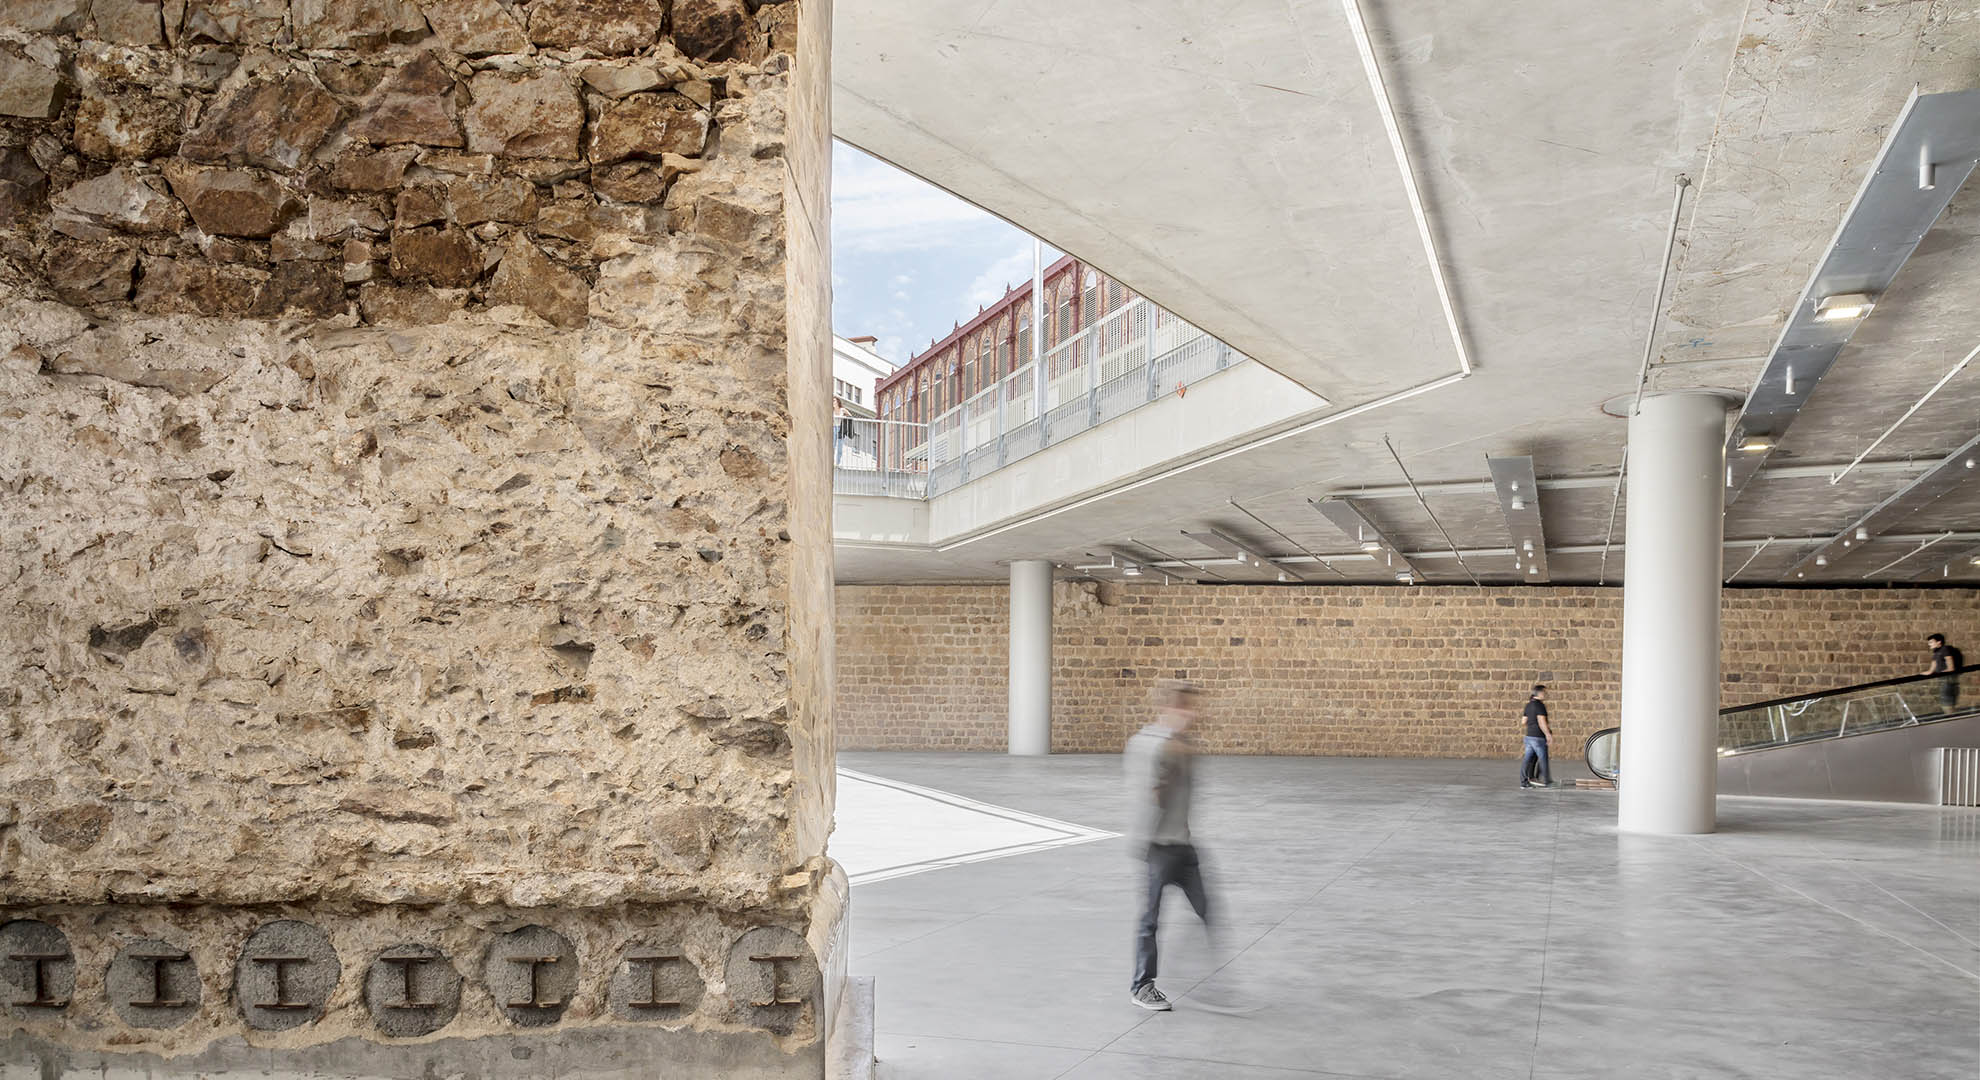 Mercat de Sant Antoni in Barcelona, Spain. Its refurbishment unveiled archaeological remains of old walls. Image Adrià Goula